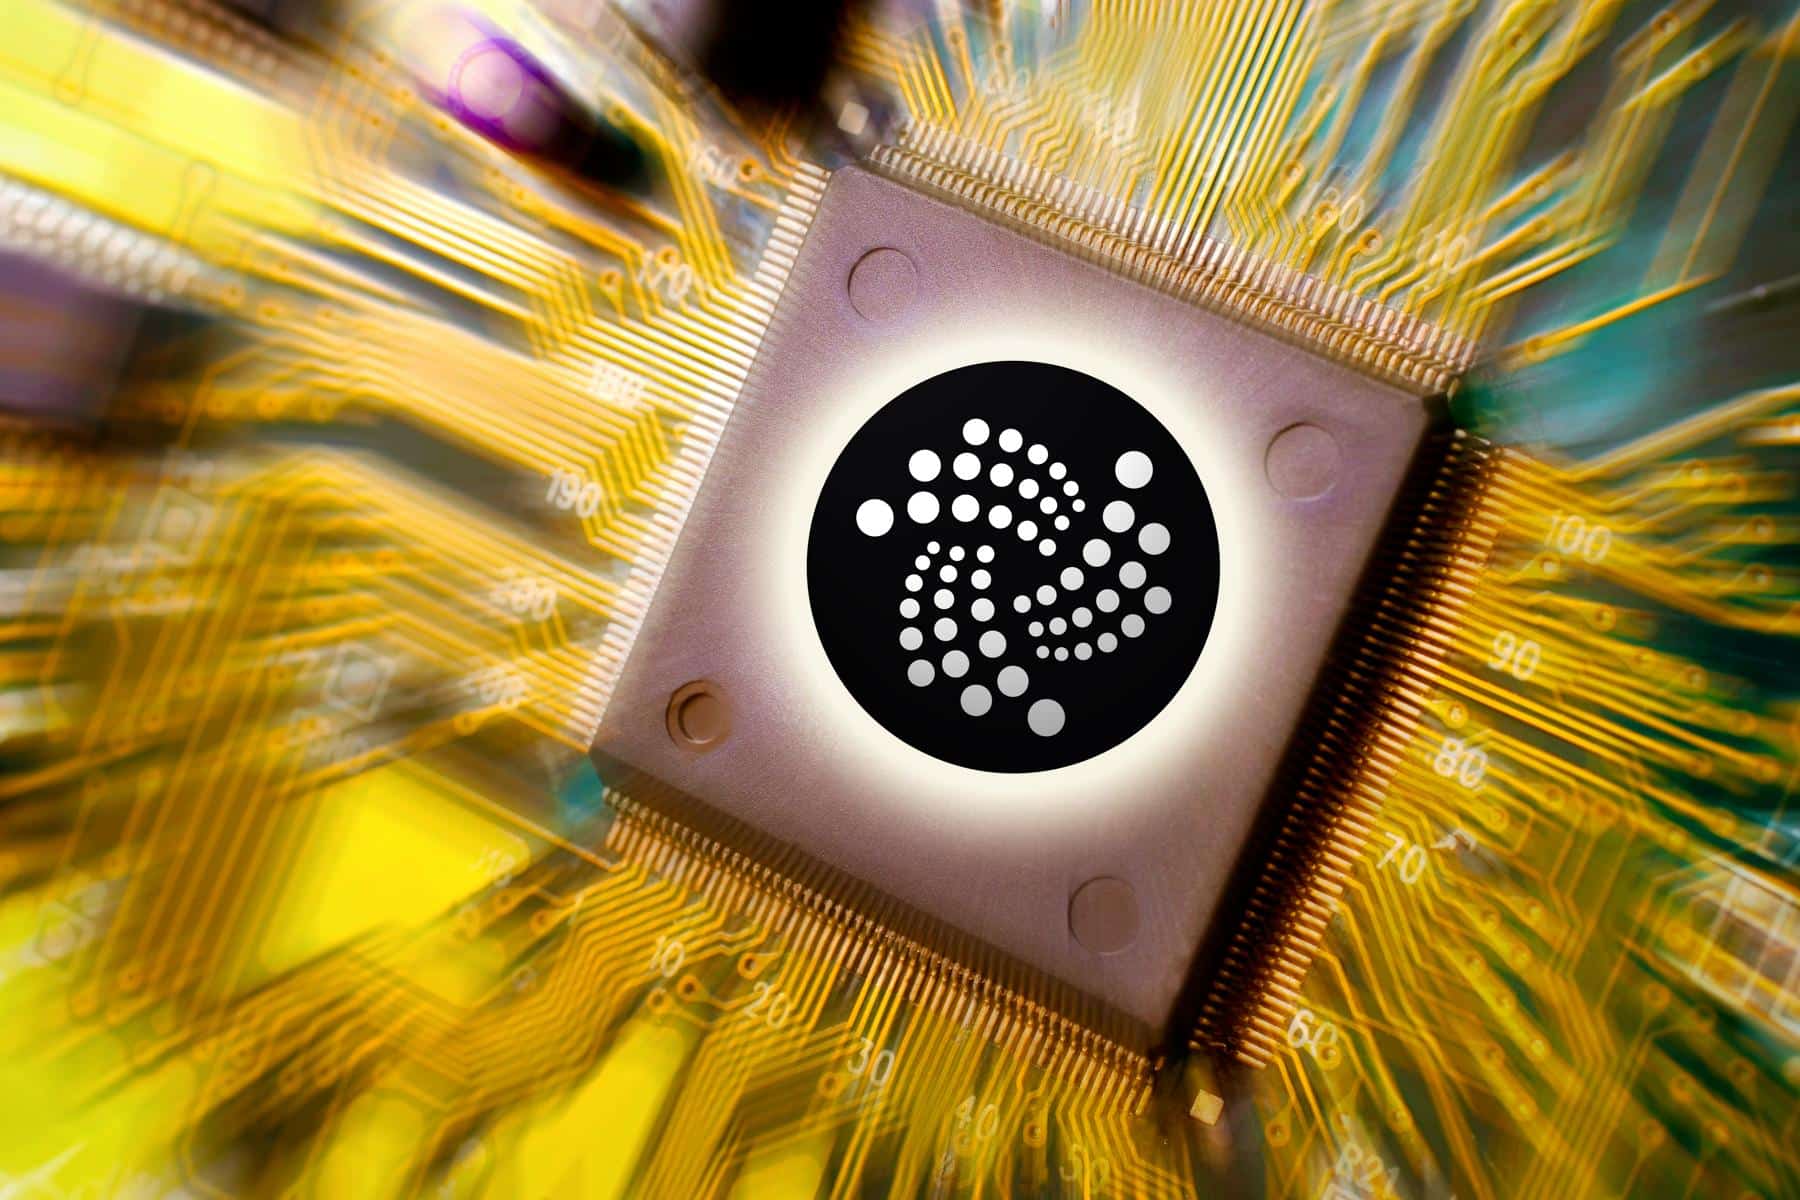 IOTA Accelerates its Growth Journey: EVM Launch, Staking, and Government Adoption in Focus